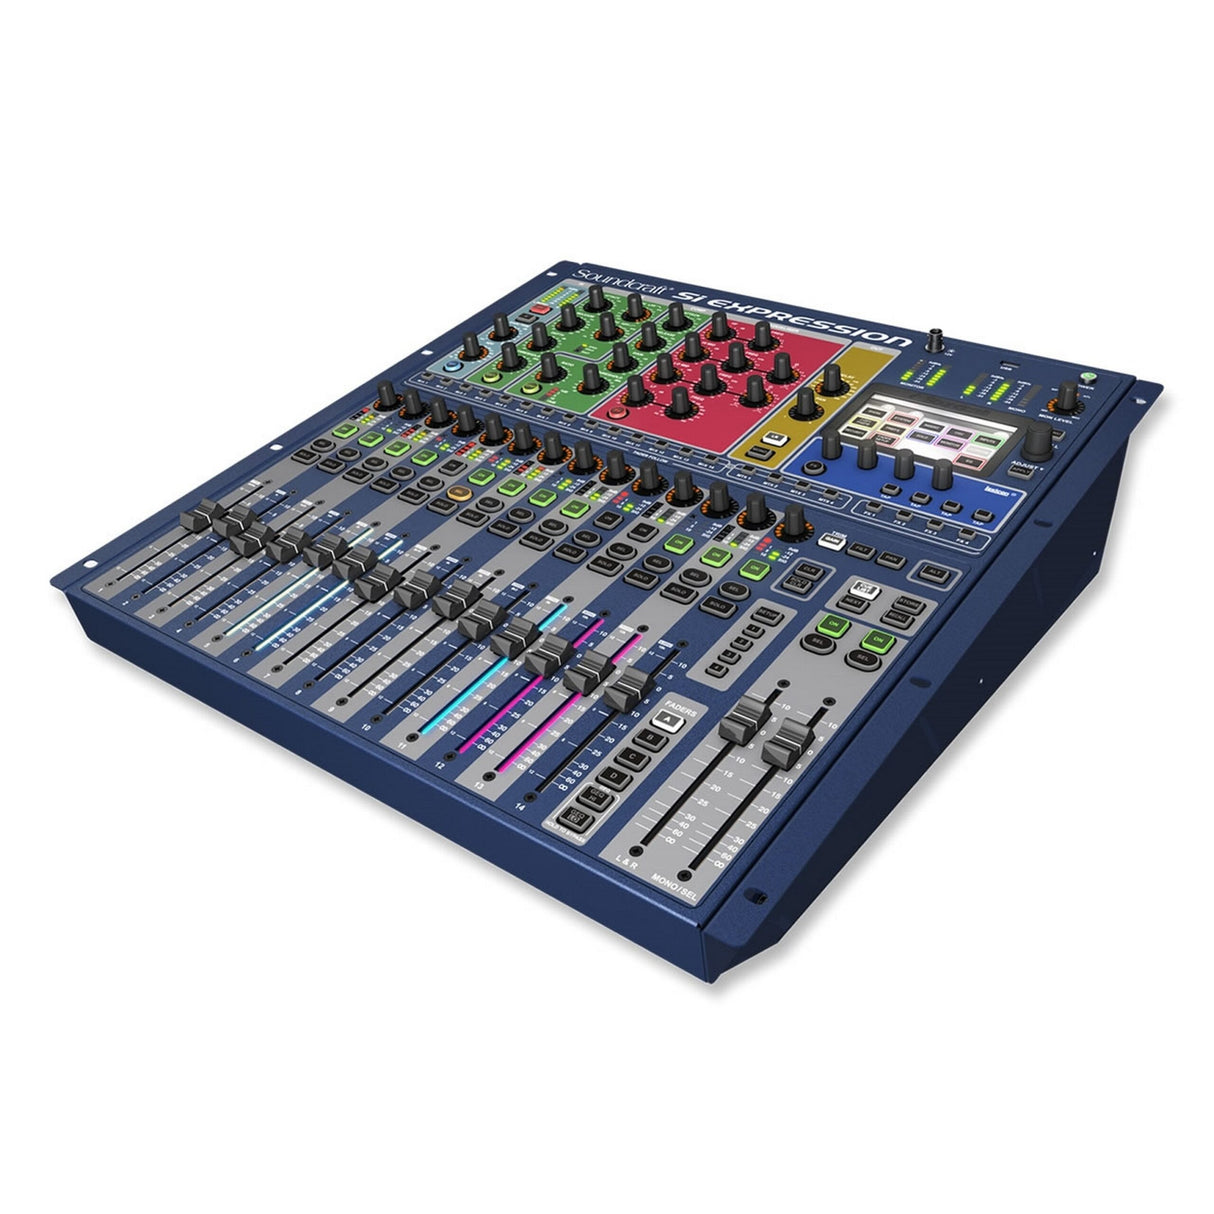 Soundcraft Si Expression 1 16-Channel Digital Console